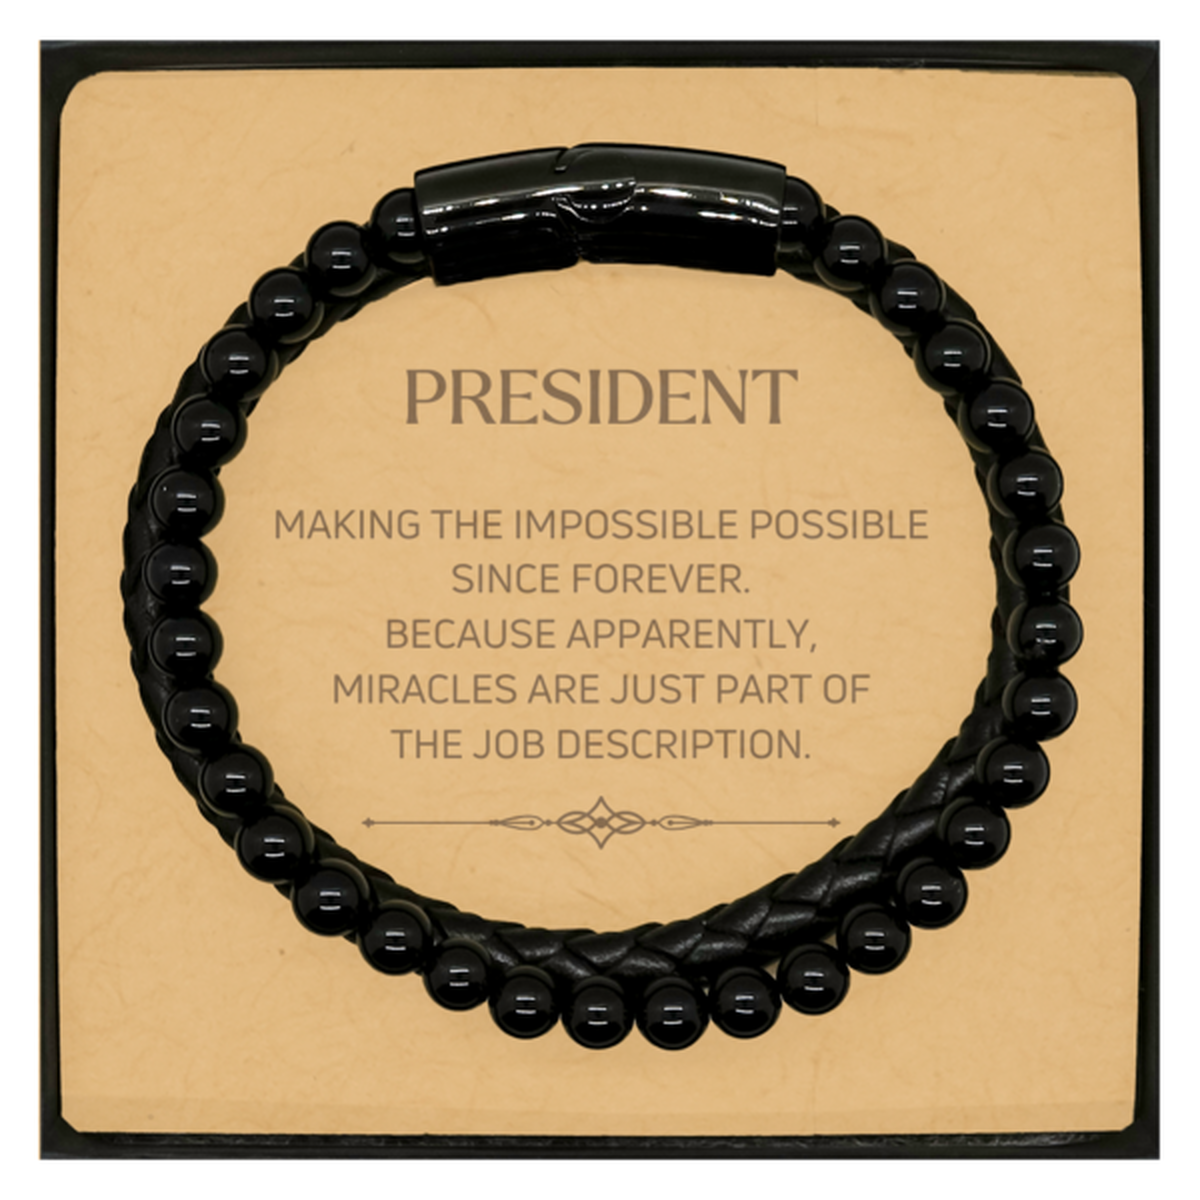 Funny President Gifts, Miracles are just part of the job description, Inspirational Birthday Christmas Stone Leather Bracelets For President, Men, Women, Coworkers, Friends, Boss